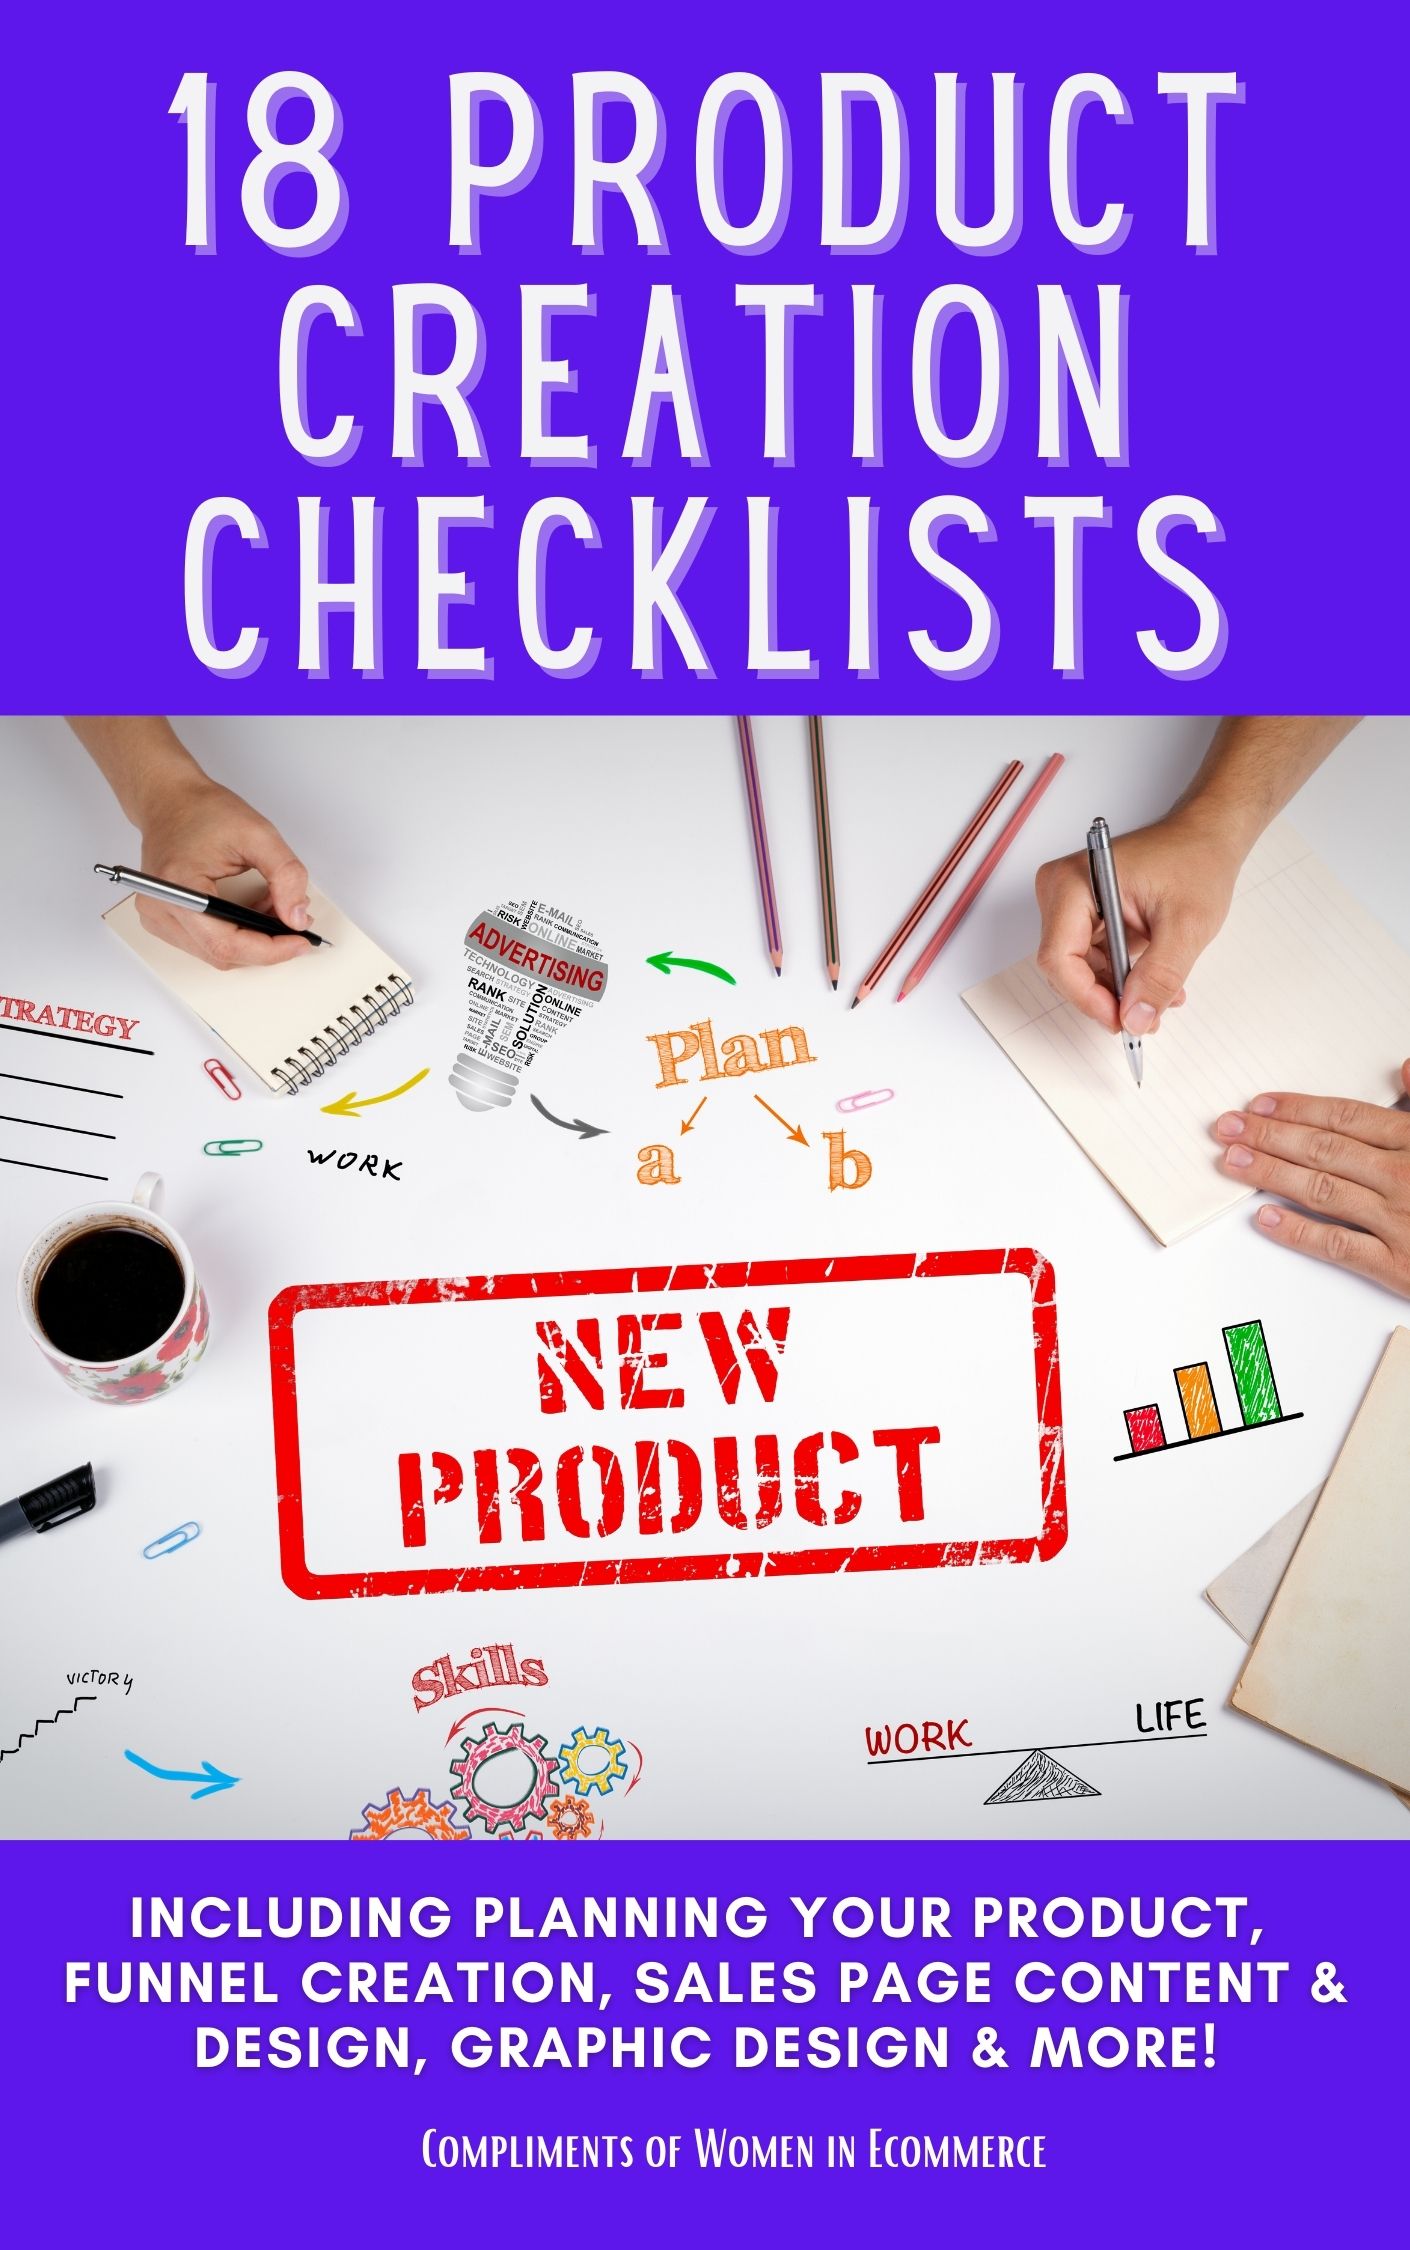 "18 PRODUCT CREATION CHECKLISTS"